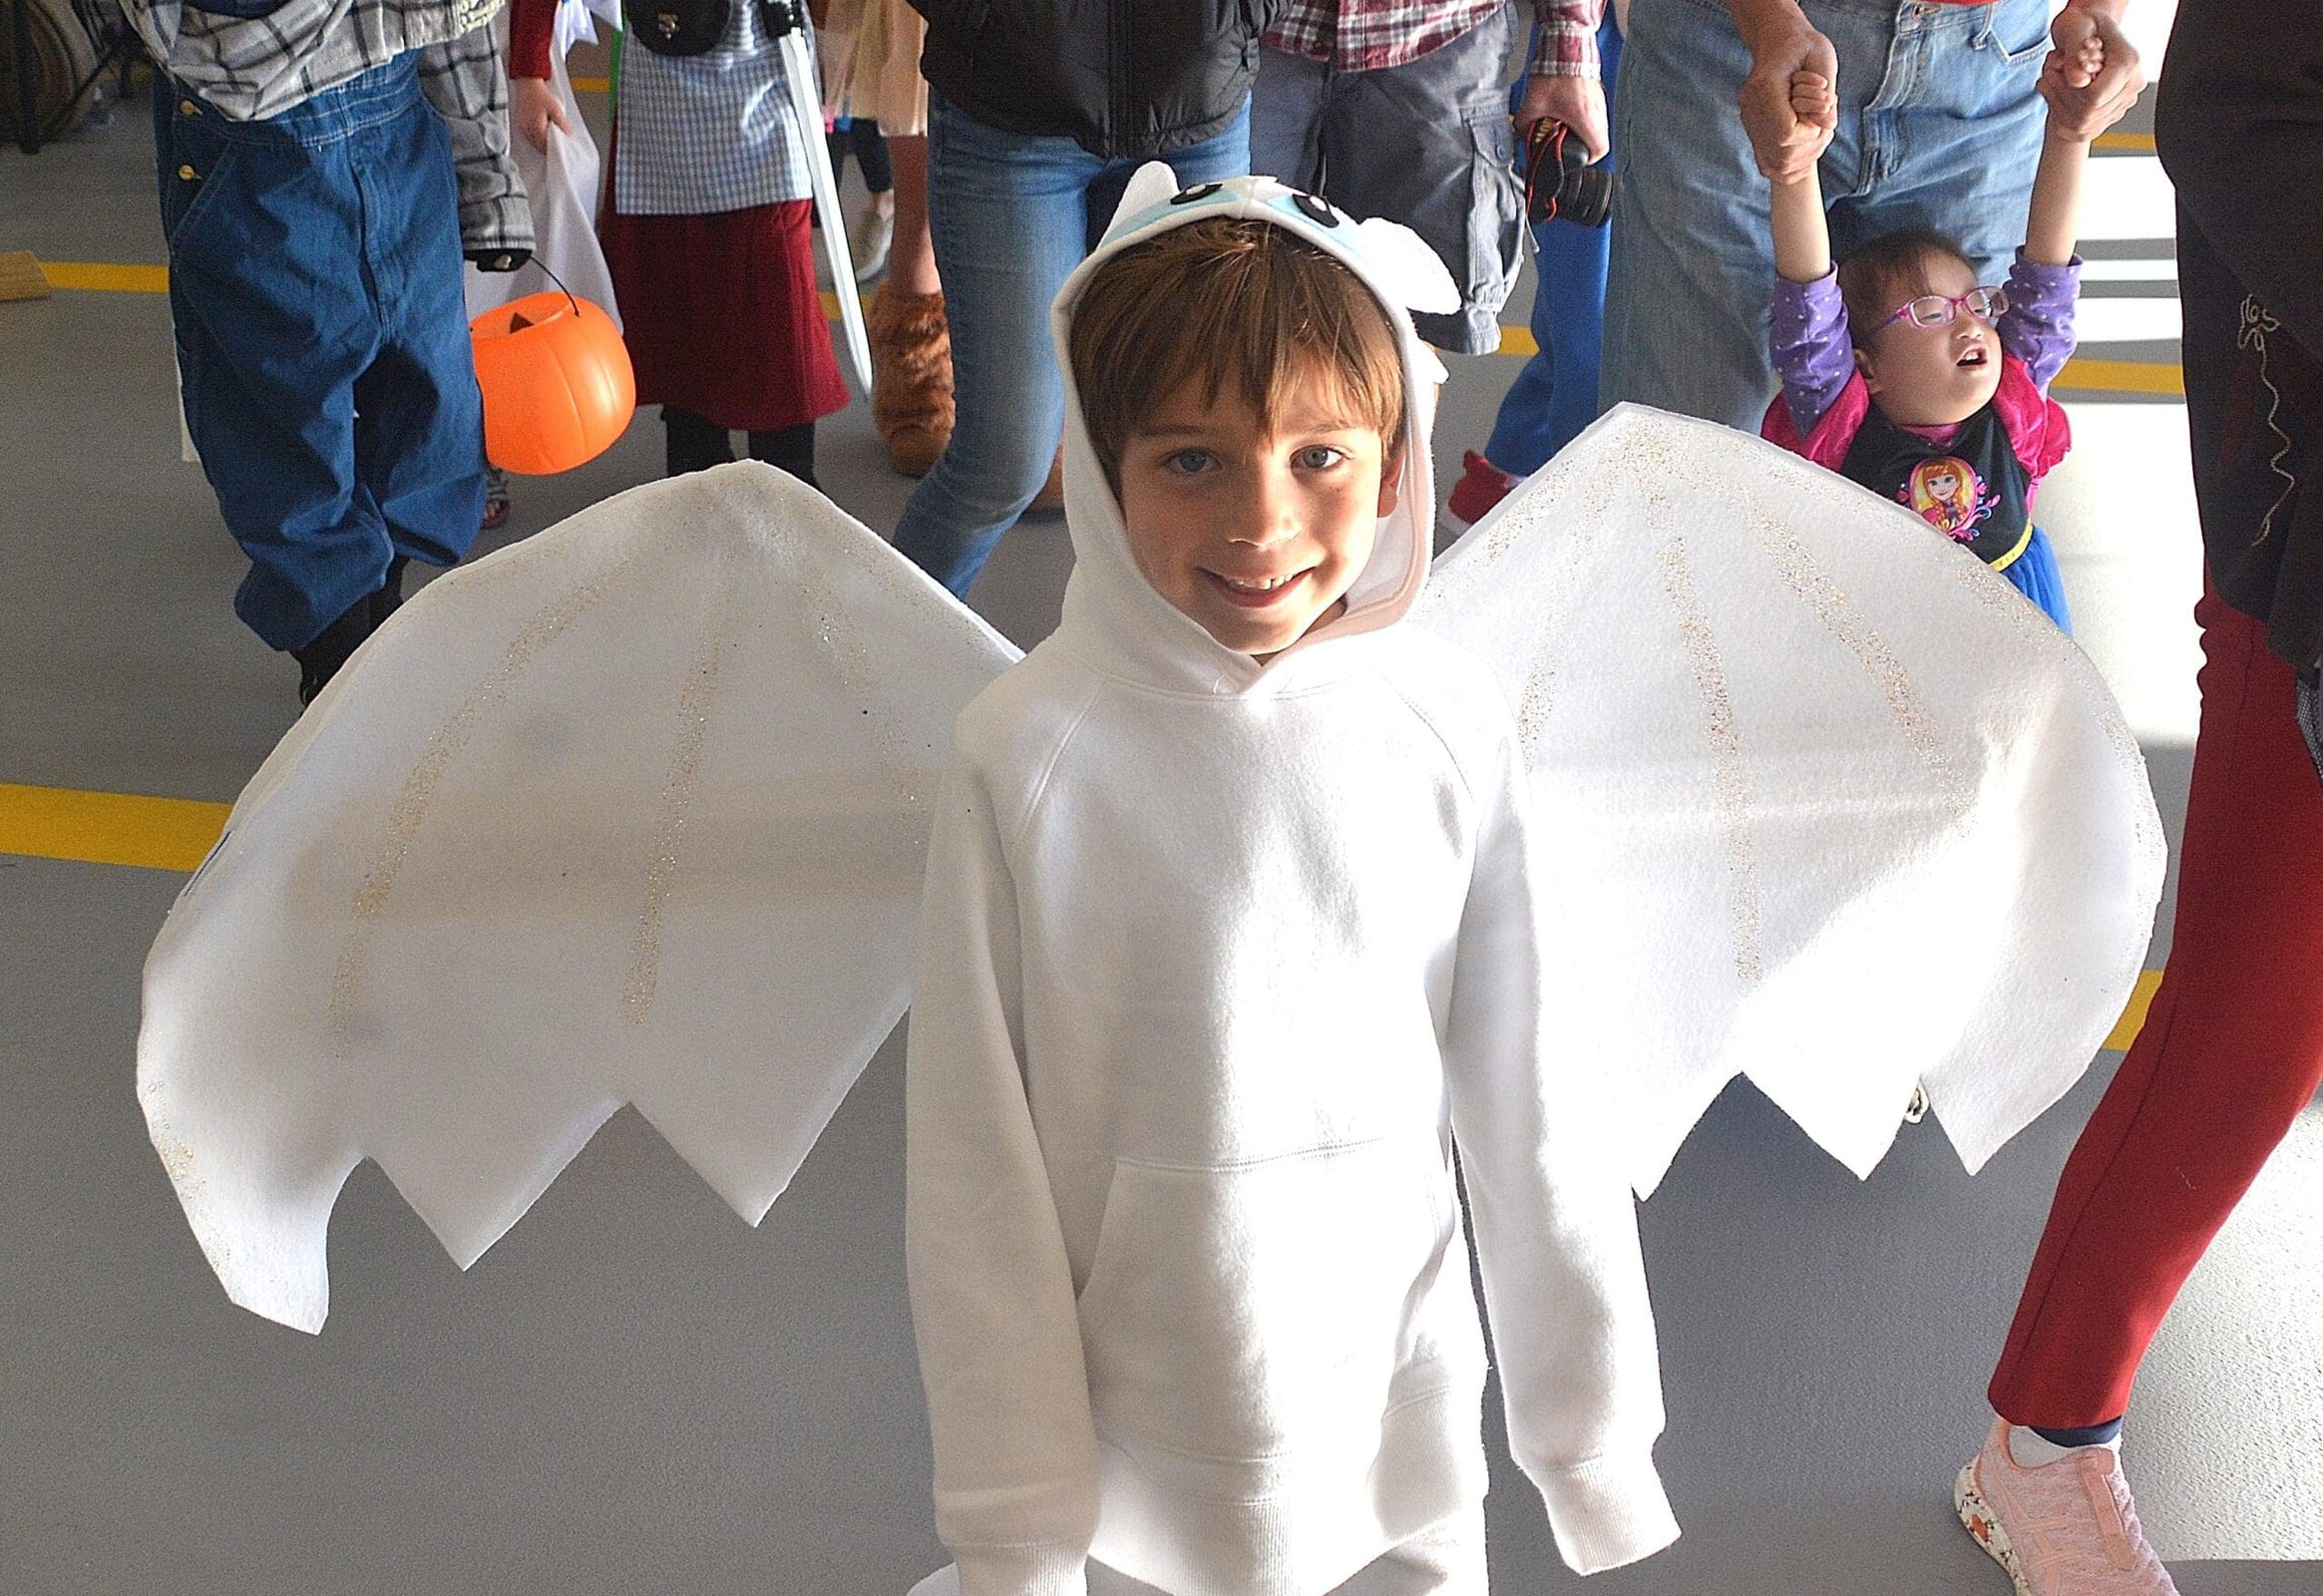 Costumed as Light Fury from the animated film “How to Train Your Dragon,” Max Sorrentino, 5, marches past judges and ultimately wins cutest costume with his brother Jack, 8.